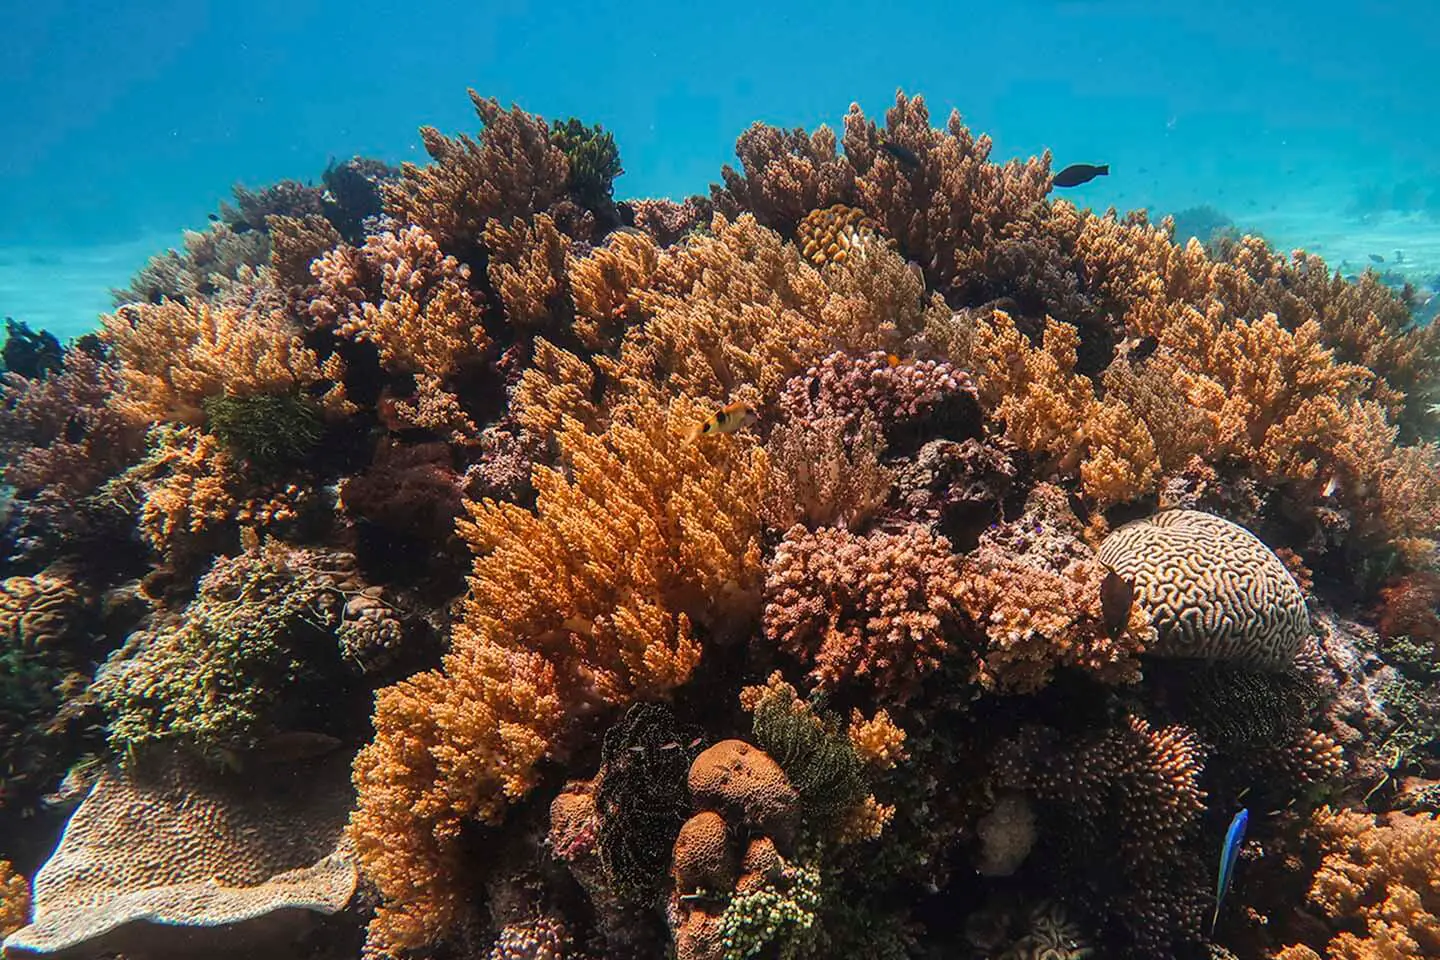 A good variety of soft and hard corals in Diver's Heaven, Balicasag Island